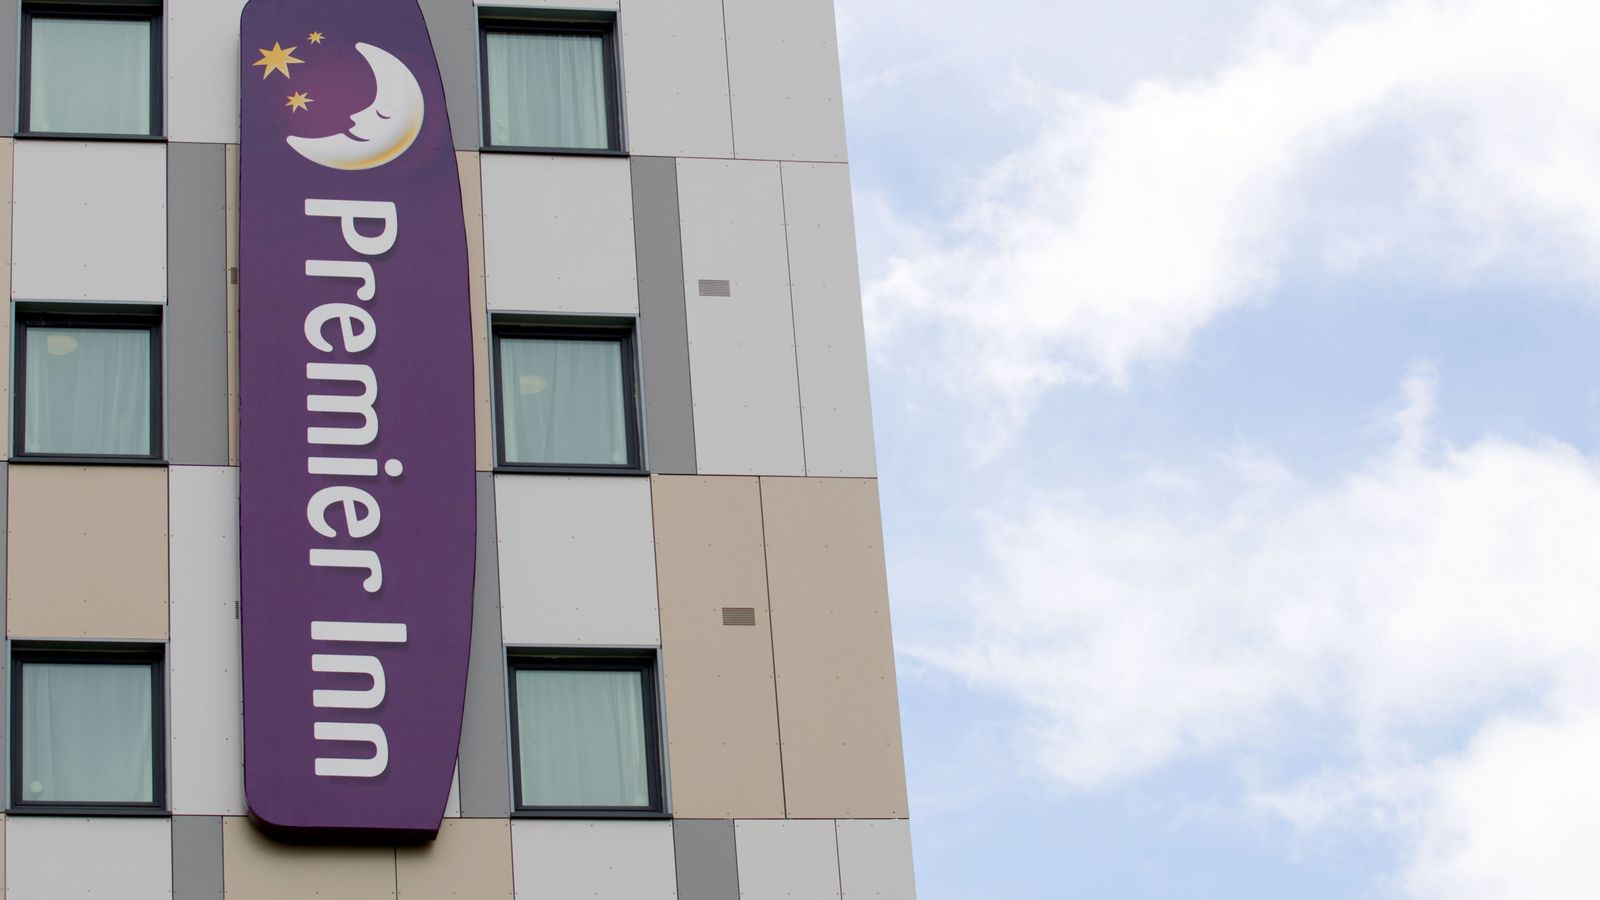 Premier Inn banned from advertising rooms 'from only £35 a night' by advertising authority